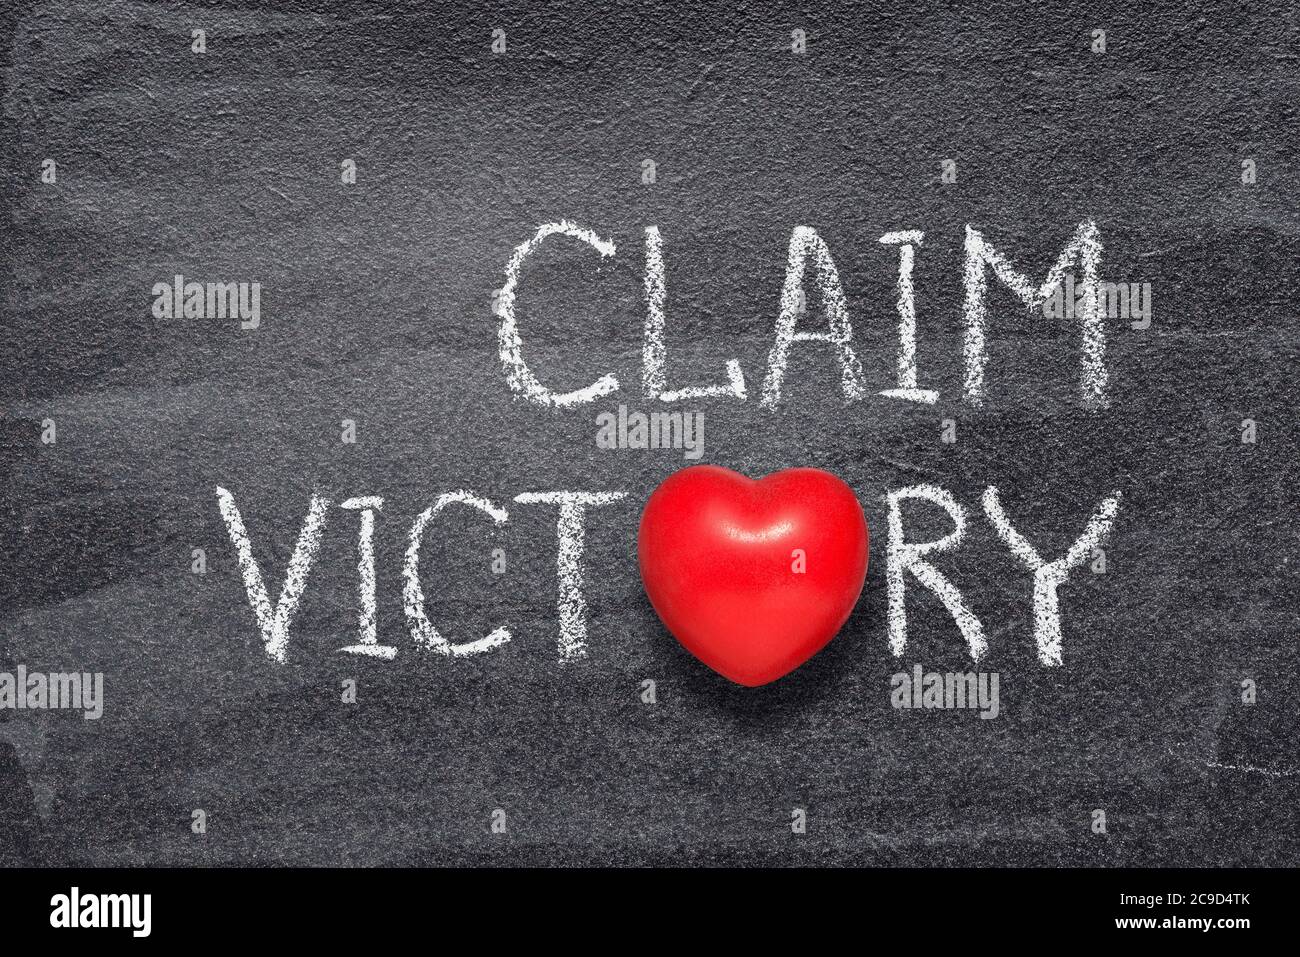 claim victory phrase written on chalkboard with red heart symbol Stock Photo